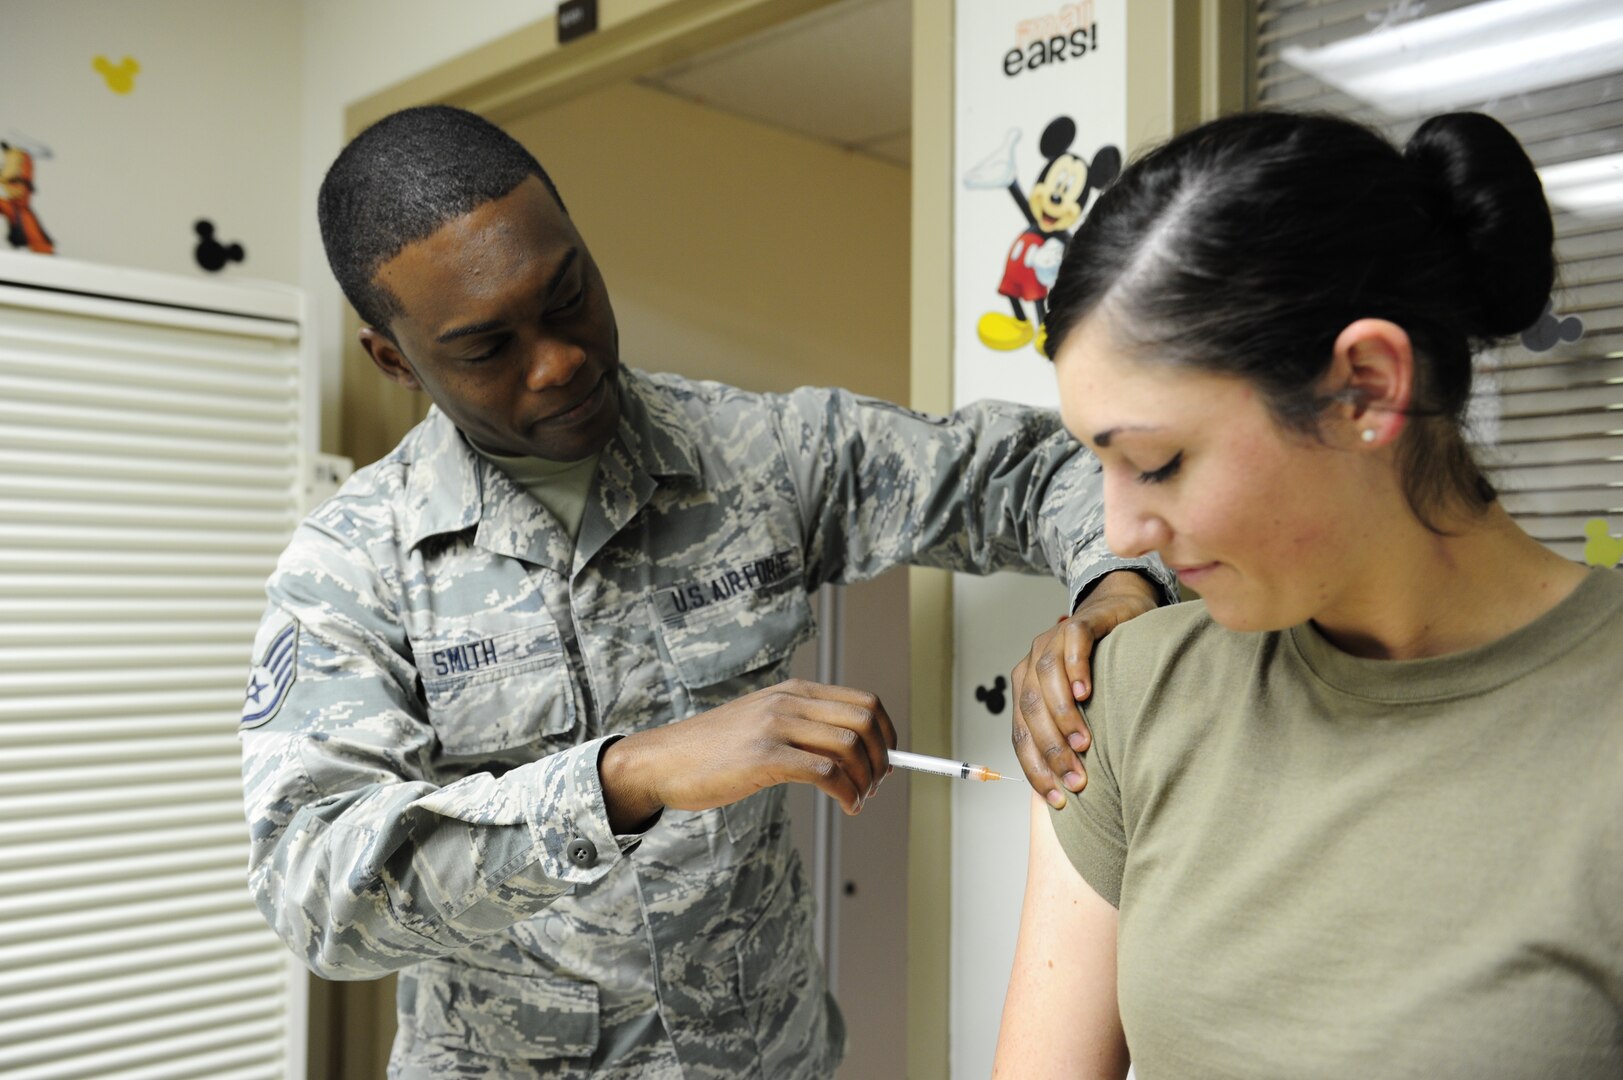 Staff Sgt. Hakeem Smith, 359th Medical Operations Squadron Immunization Clinic NCO in charge, simulates giving an immunization to Senior Airman Kayli O’Keefe, 359th MDOS medical technician, at the Joint Base San Antonio-Randolph clinic, Sept. 25, 2019. With flu season quickly approaching, health care professionals throughout JBSA are encouraging beneficiaries to receive their flu shots once the vaccines are available. The flu is spread throughout the year, but is most common during the fall and winter months. Influenza activity typically begins to increase in October and November, peaking during the winter months and continuing as late as May.